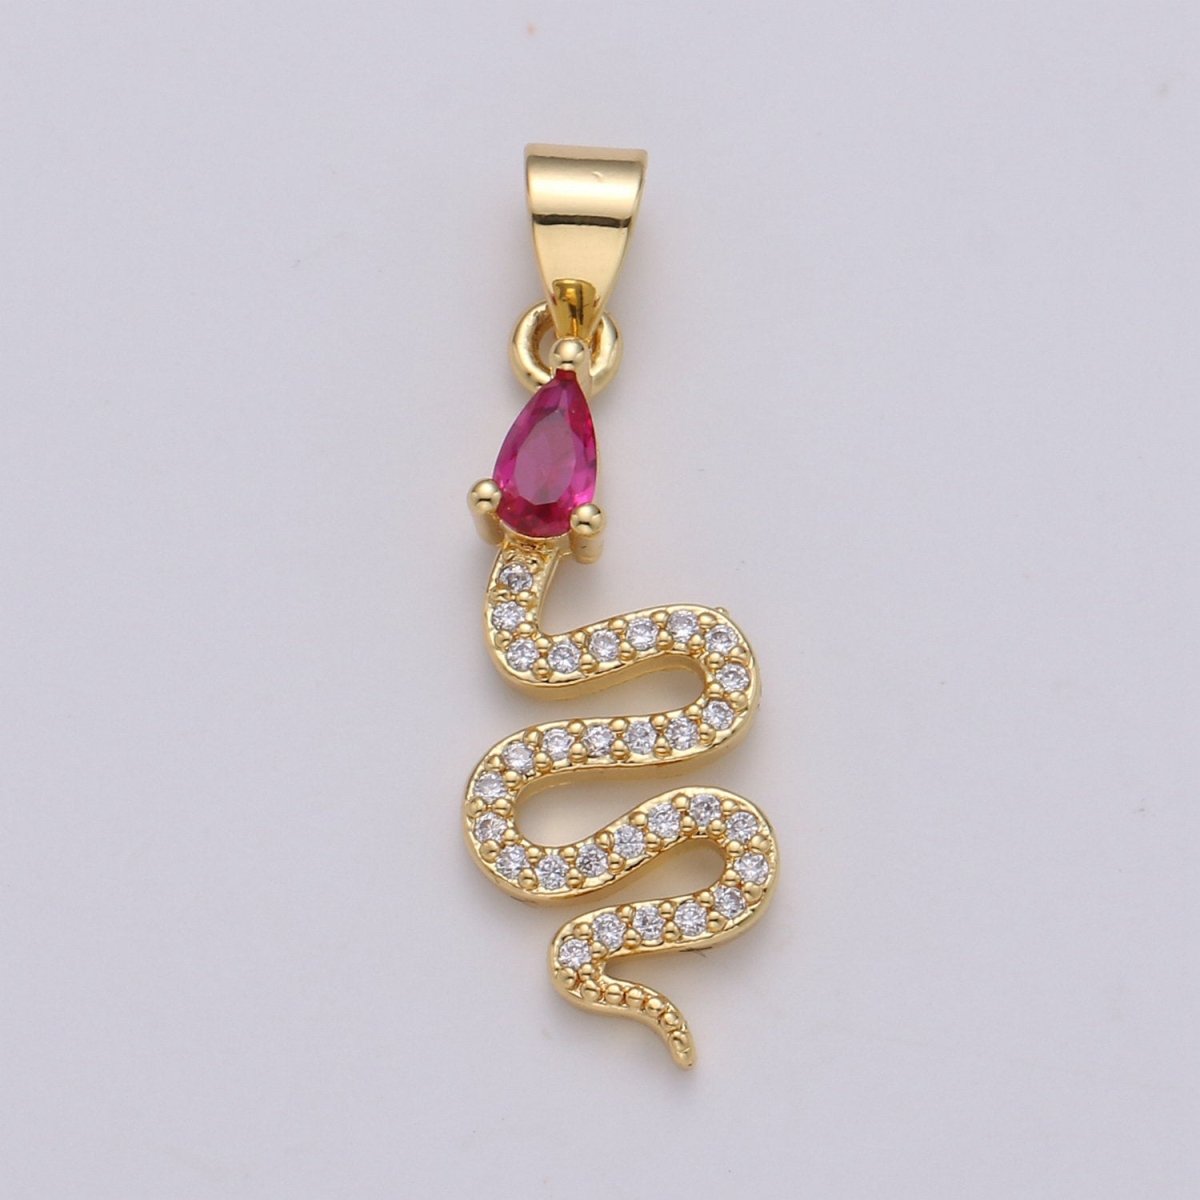 24k Gold Filled Snake Charm, Gold Snake Pendant Charm, Micro Pave Serpent Animal Cz Charm Green Blue Pink Stone DIY Jewelry I-804~I-806 - DLUXCA